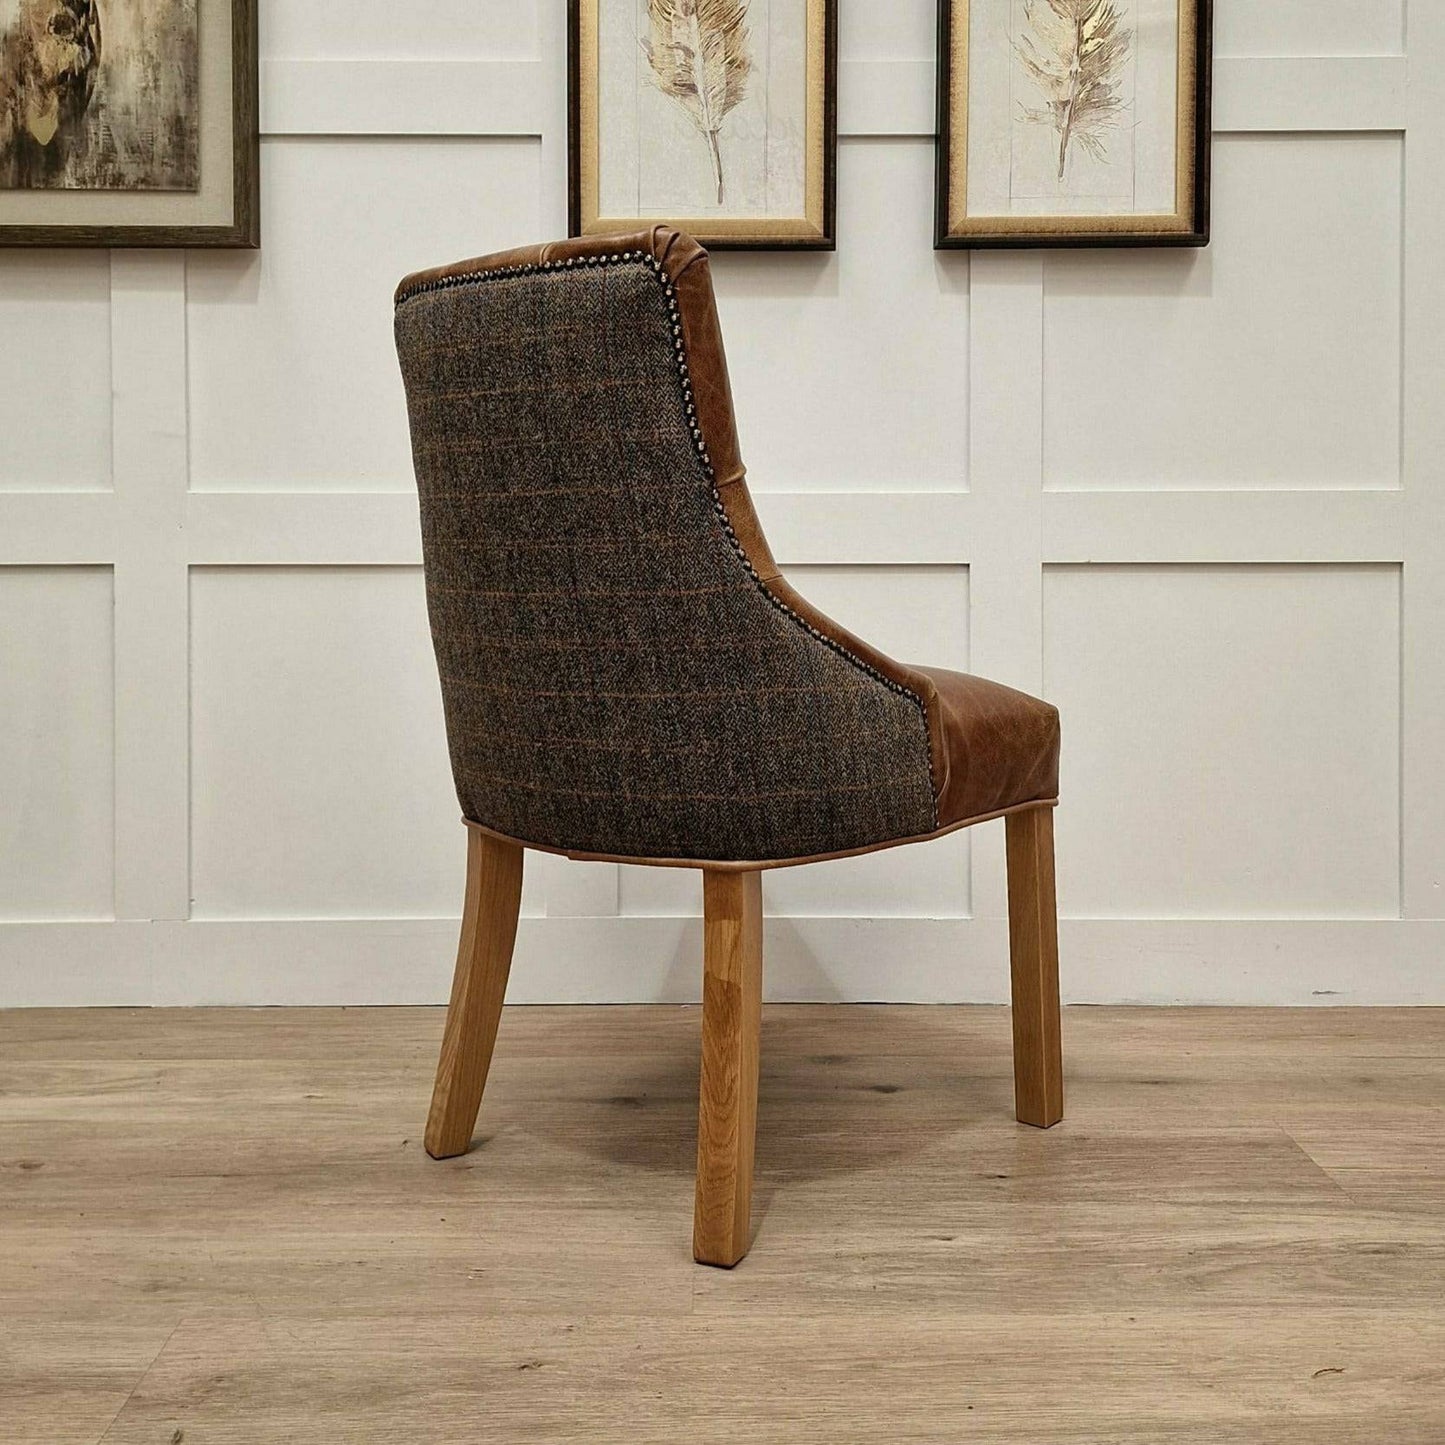 Harris tweed and Leather Dining Chair - Eddy - Dining Chair - Rydan Interiors